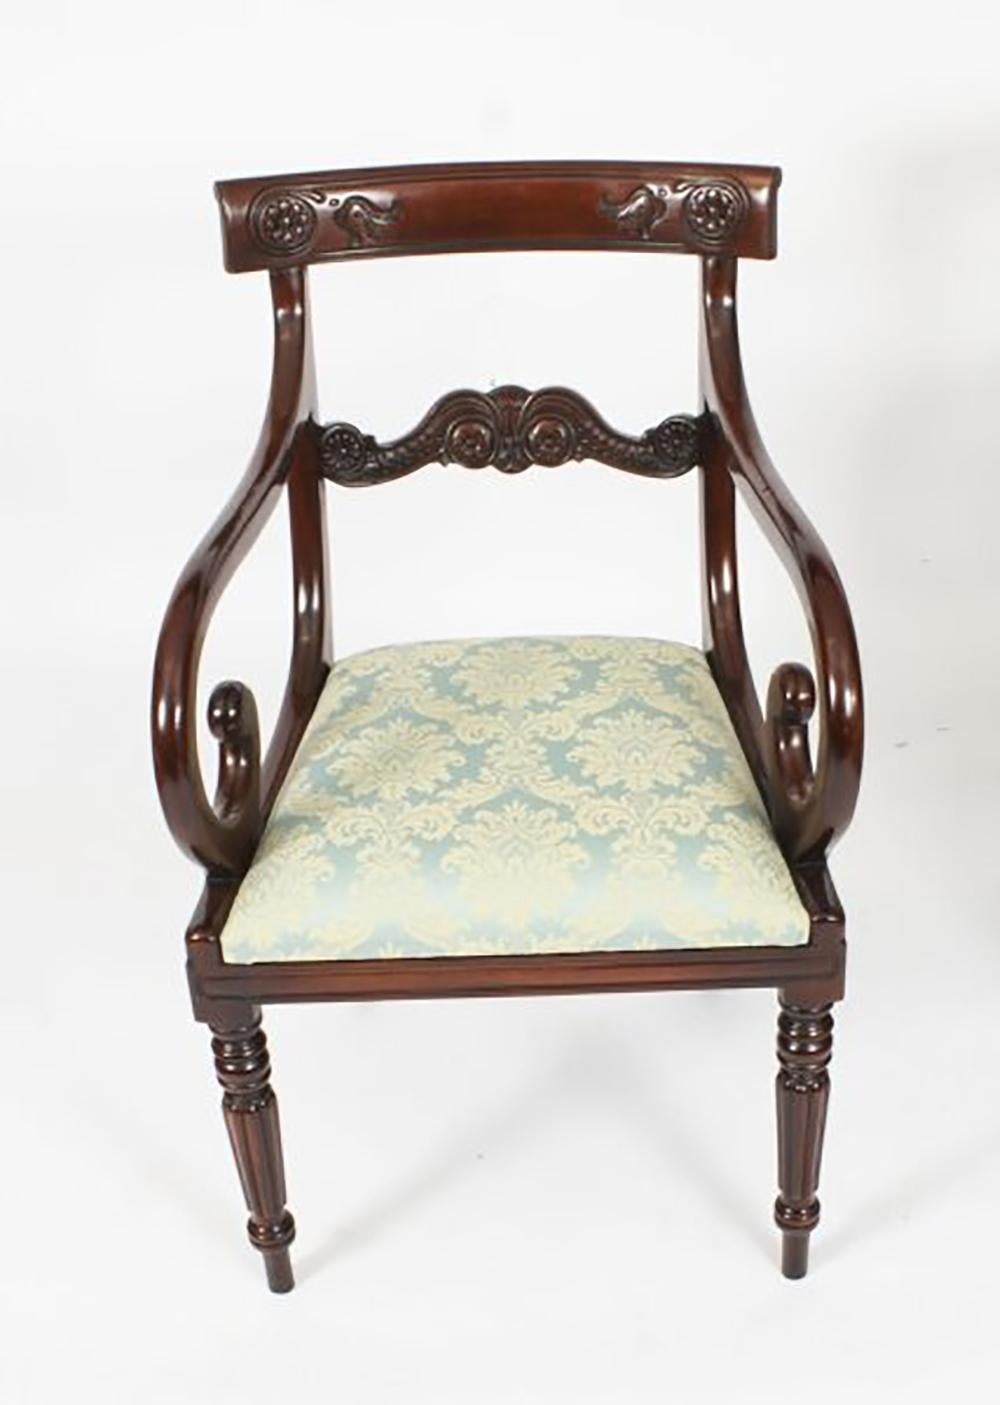 Antique William IV Mahogany Dining Table C1835 &10 Bar back dining chairs For Sale 14